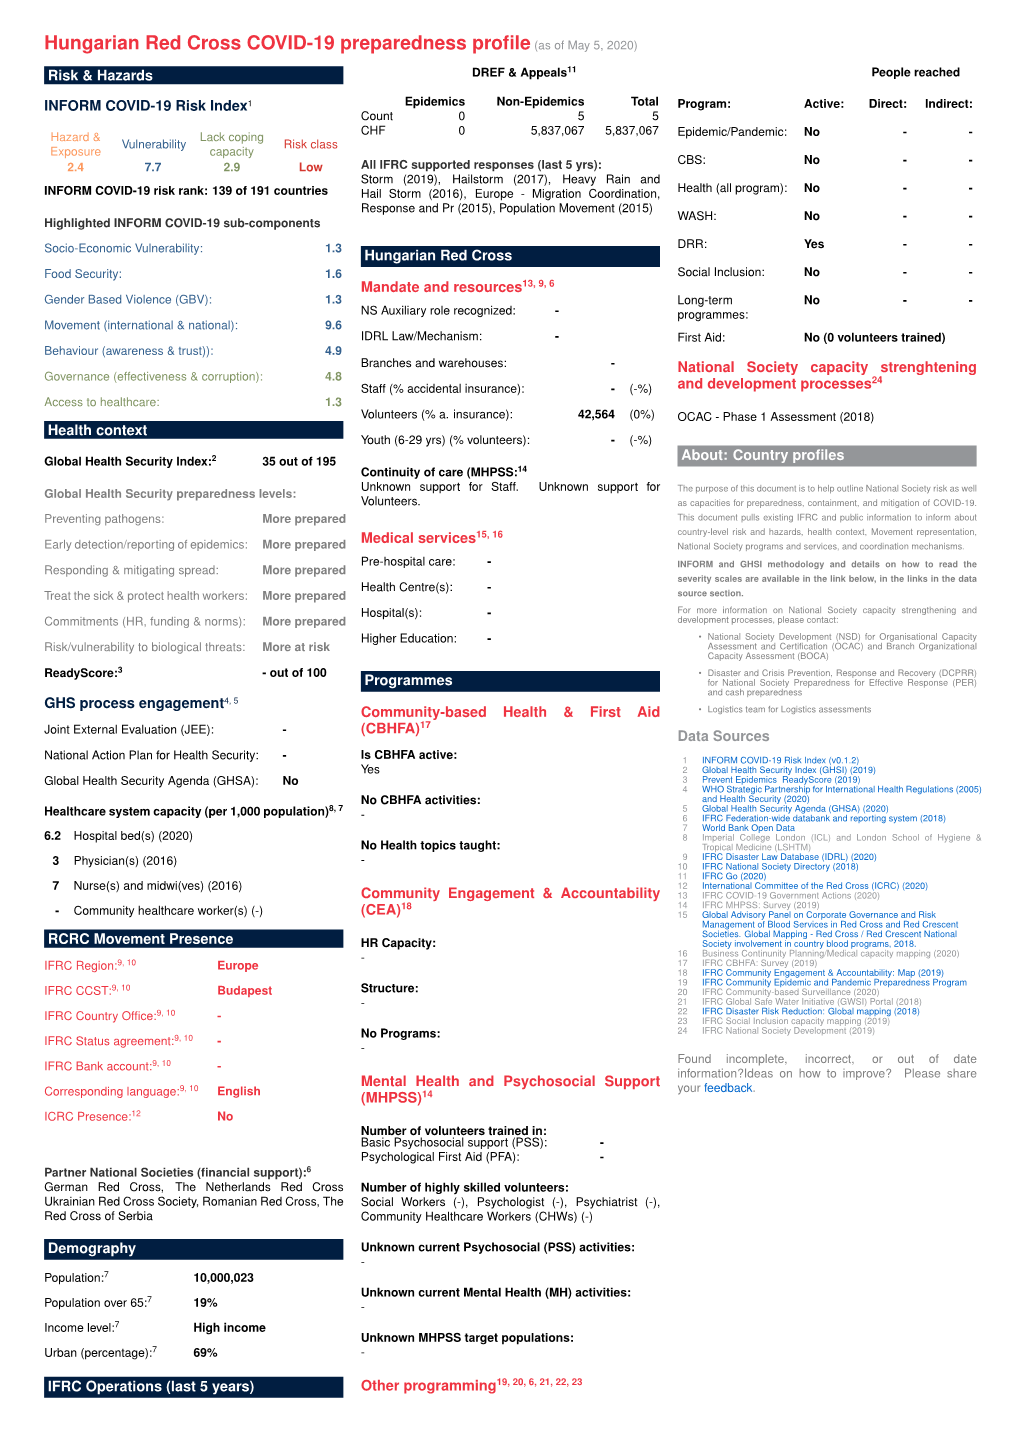 Hungarian Red Cross COVID-19 Preparedness Profile(As of May 5